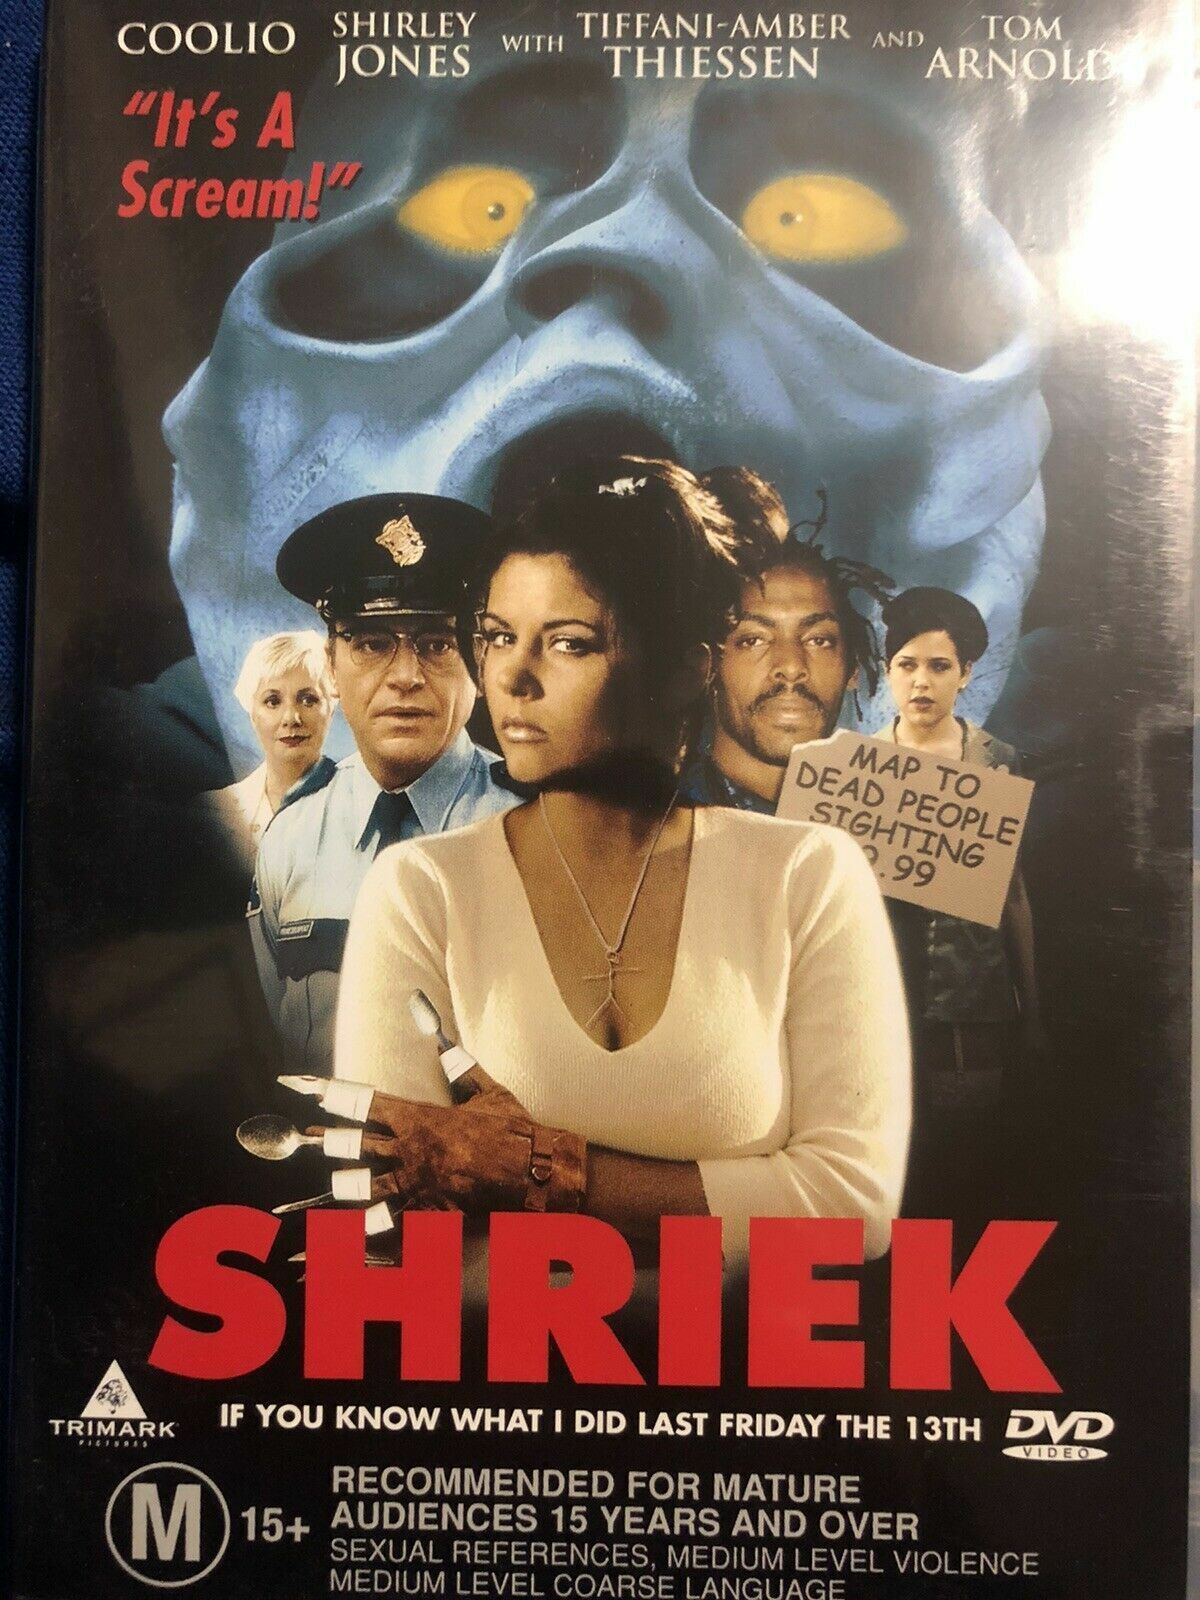 Shriek DVD -  If You Know What I Did Last Friday The 13th - RARE OOP Region 4